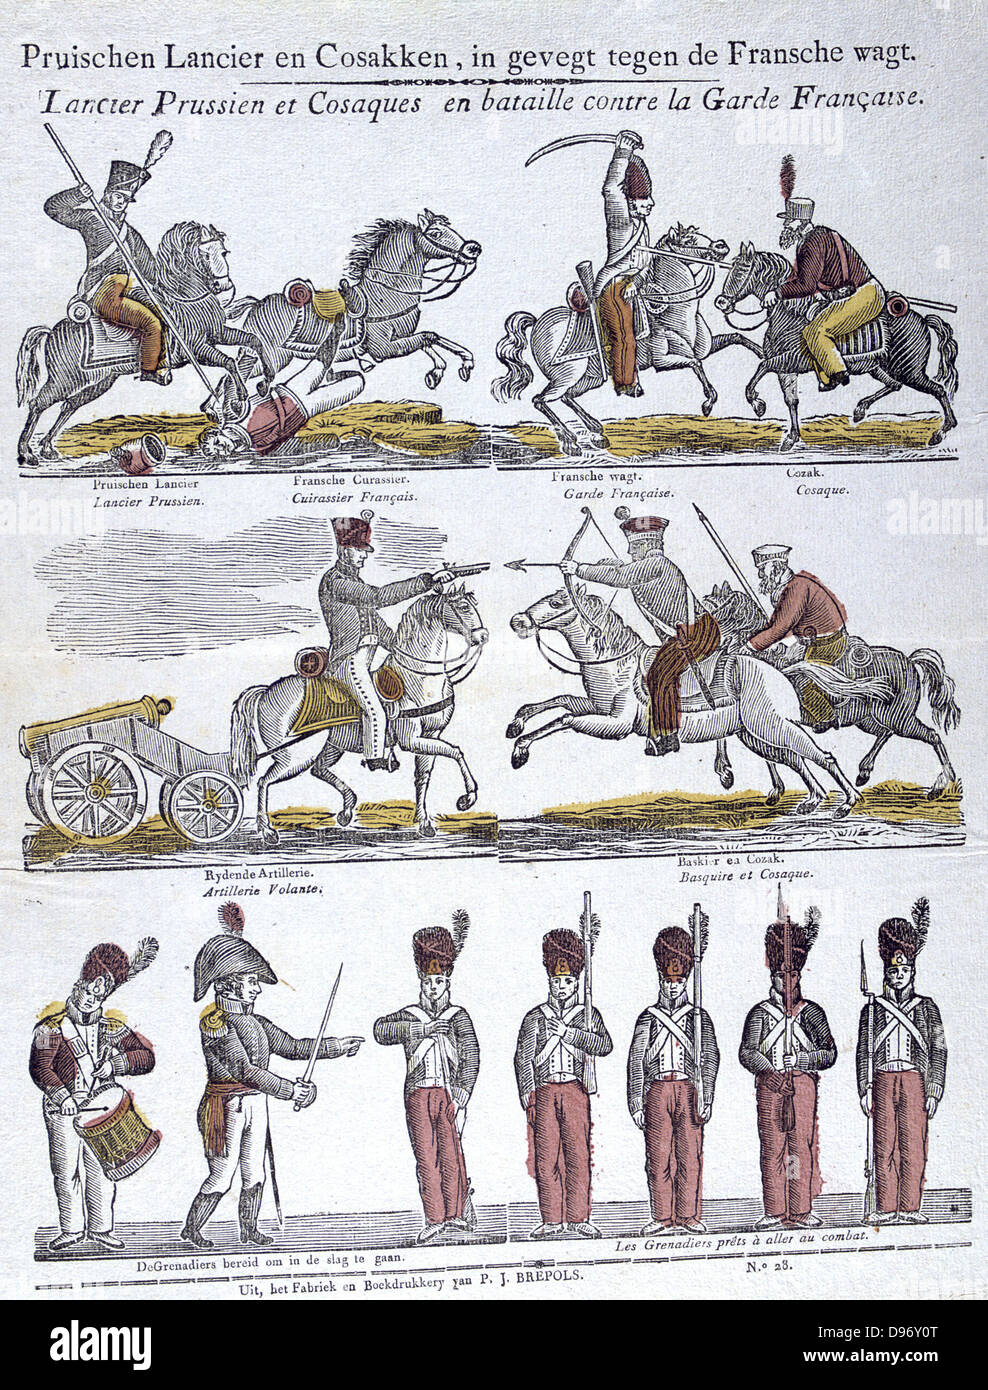 Prussian Lancers and Cossacks fighting French troops. |19th century popular hand-coloured woodcut. Stock Photo